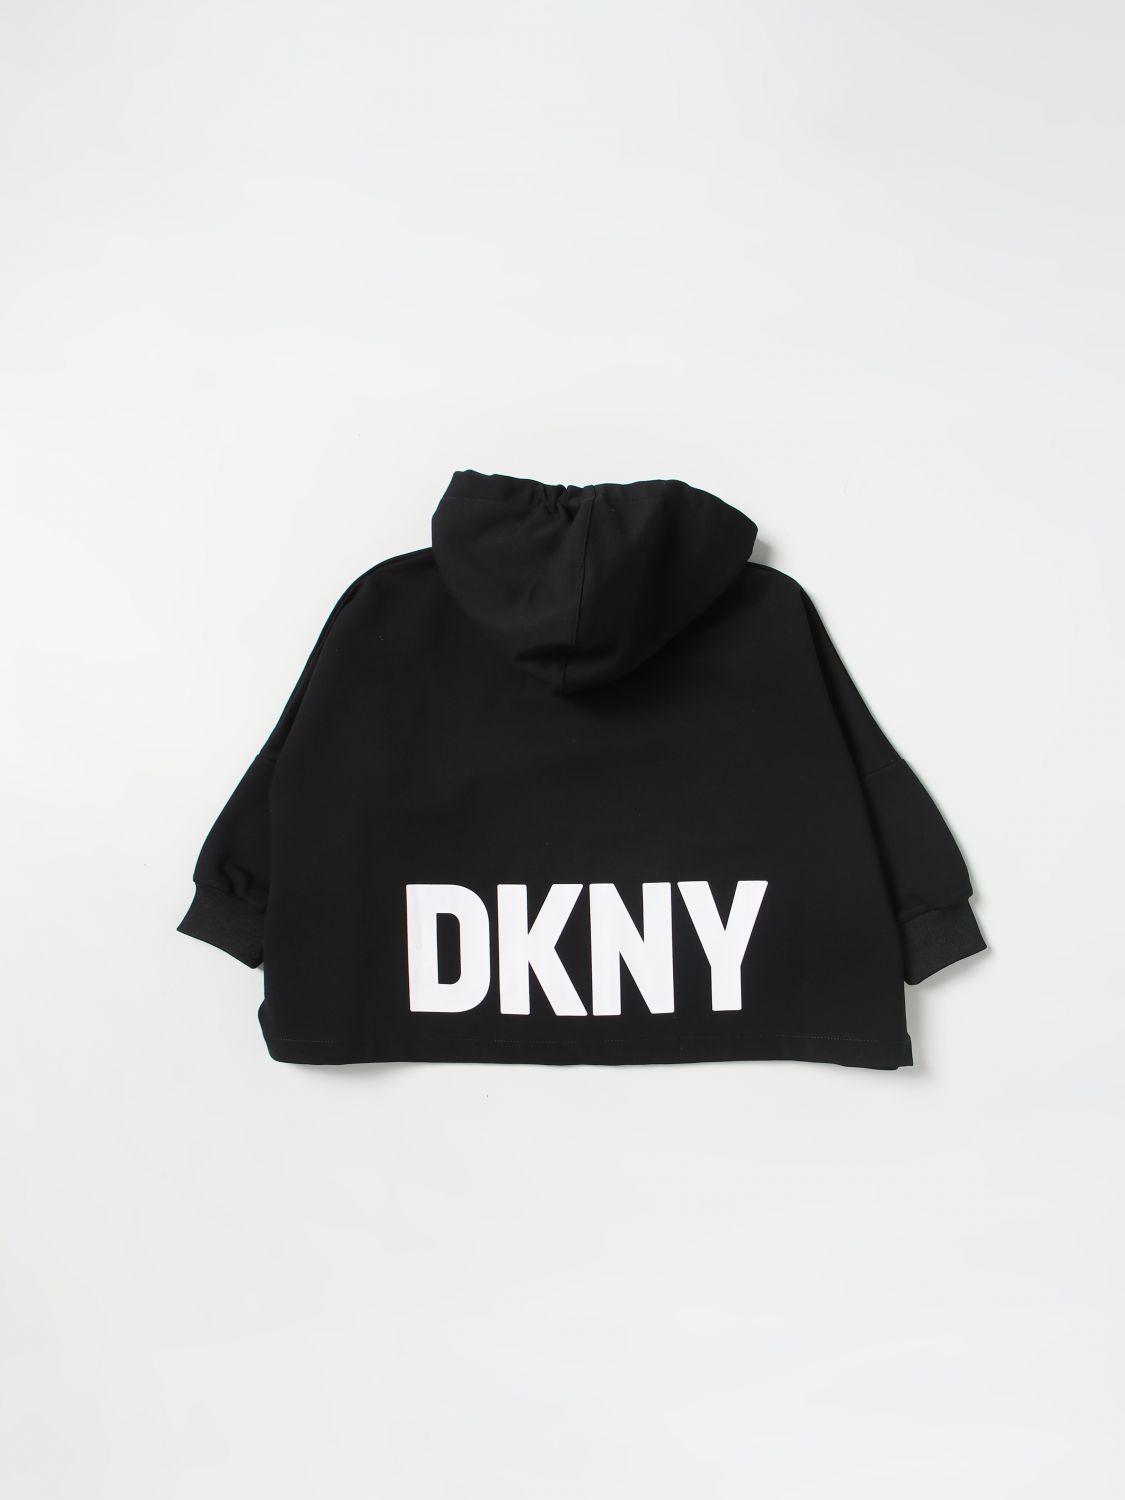 Dkny sweater for girls Black | Dkny sweater D35S59 online on GIGLIO.COM